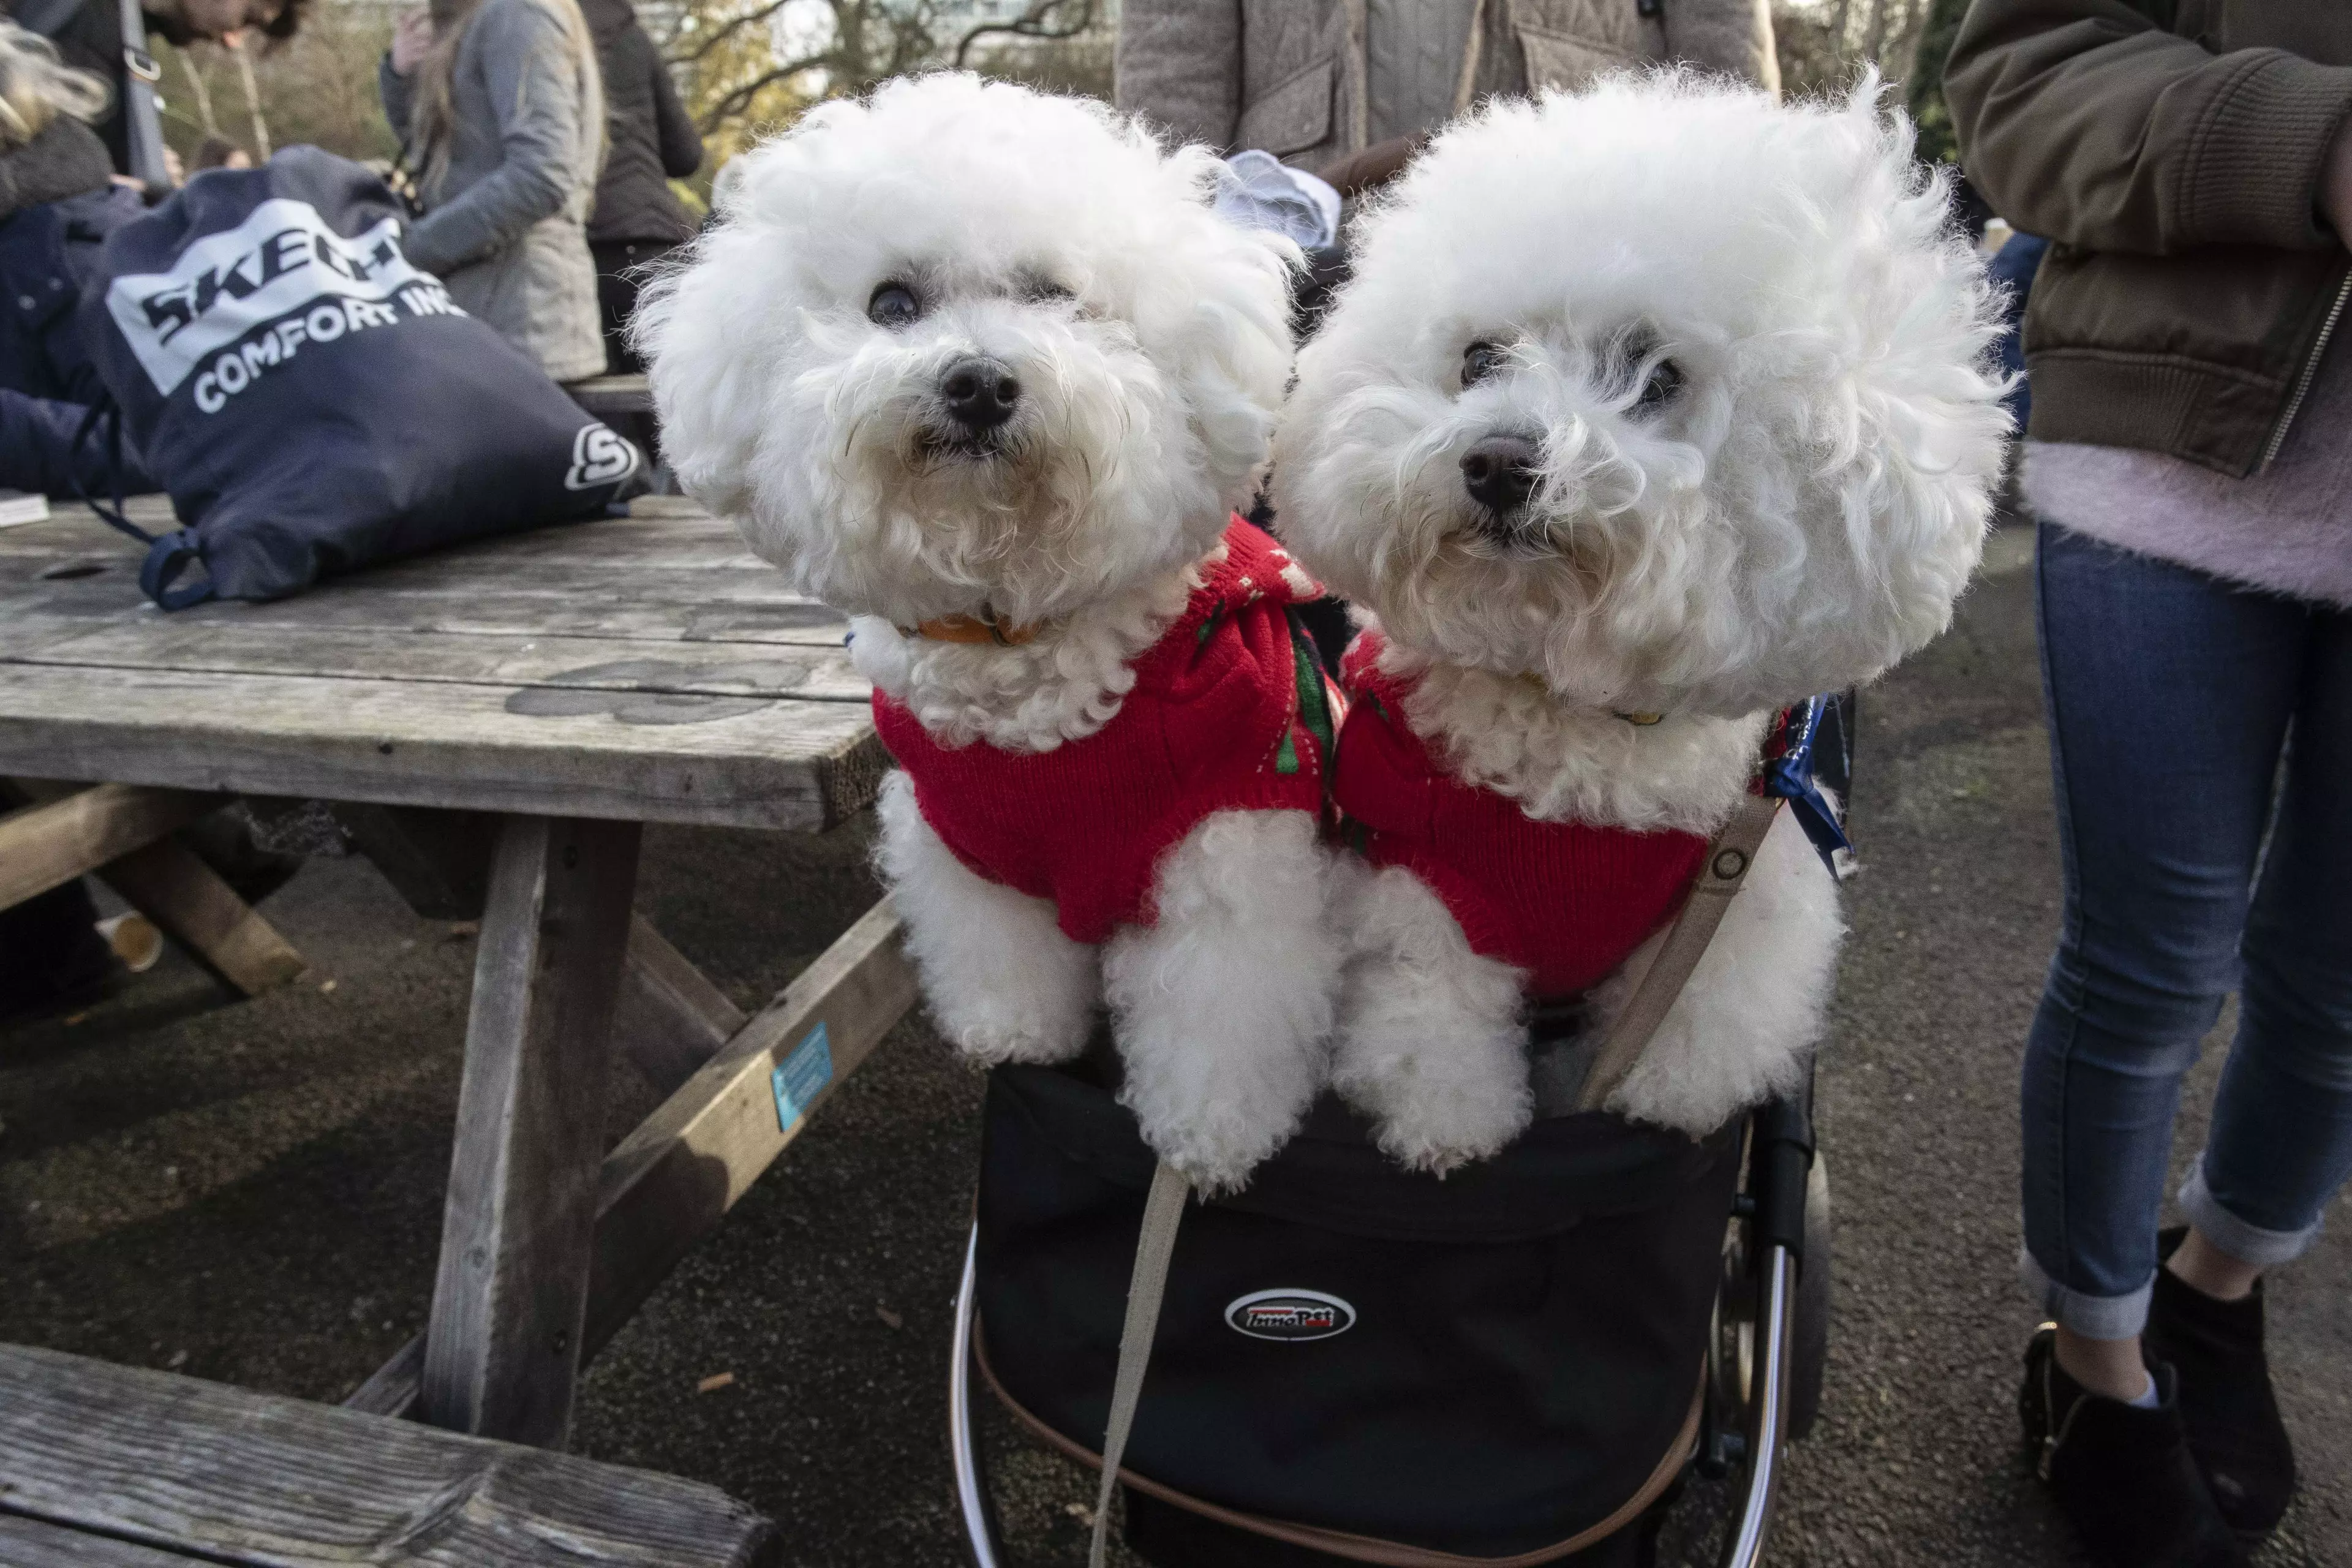 They met in Battersea Park in their festive knits (